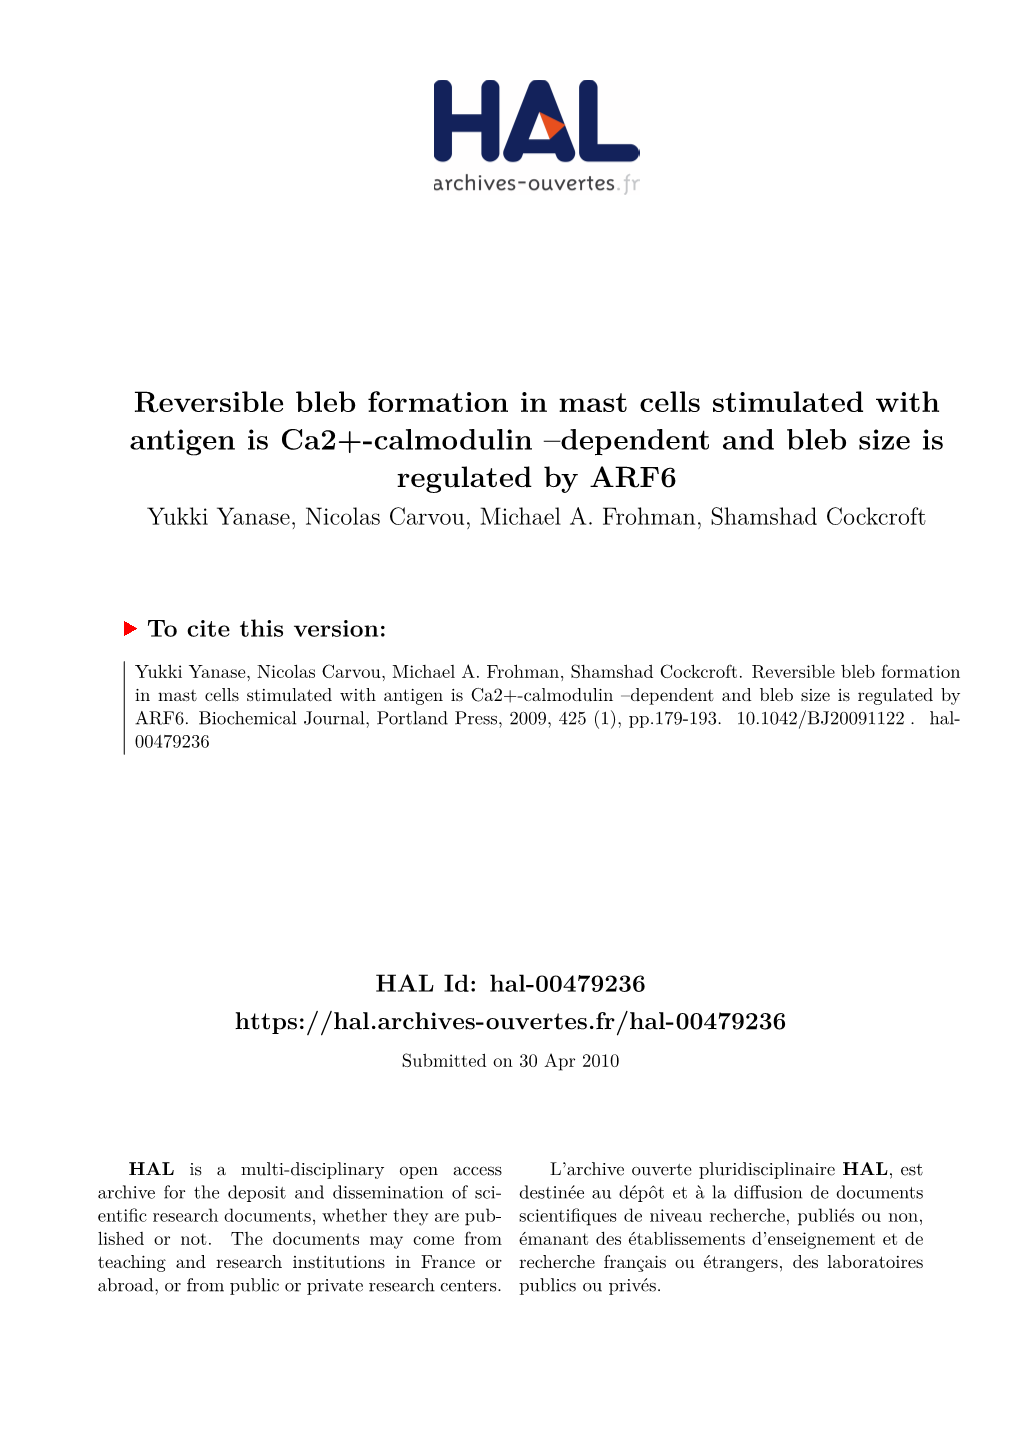 Reversible Bleb Formation in Mast Cells